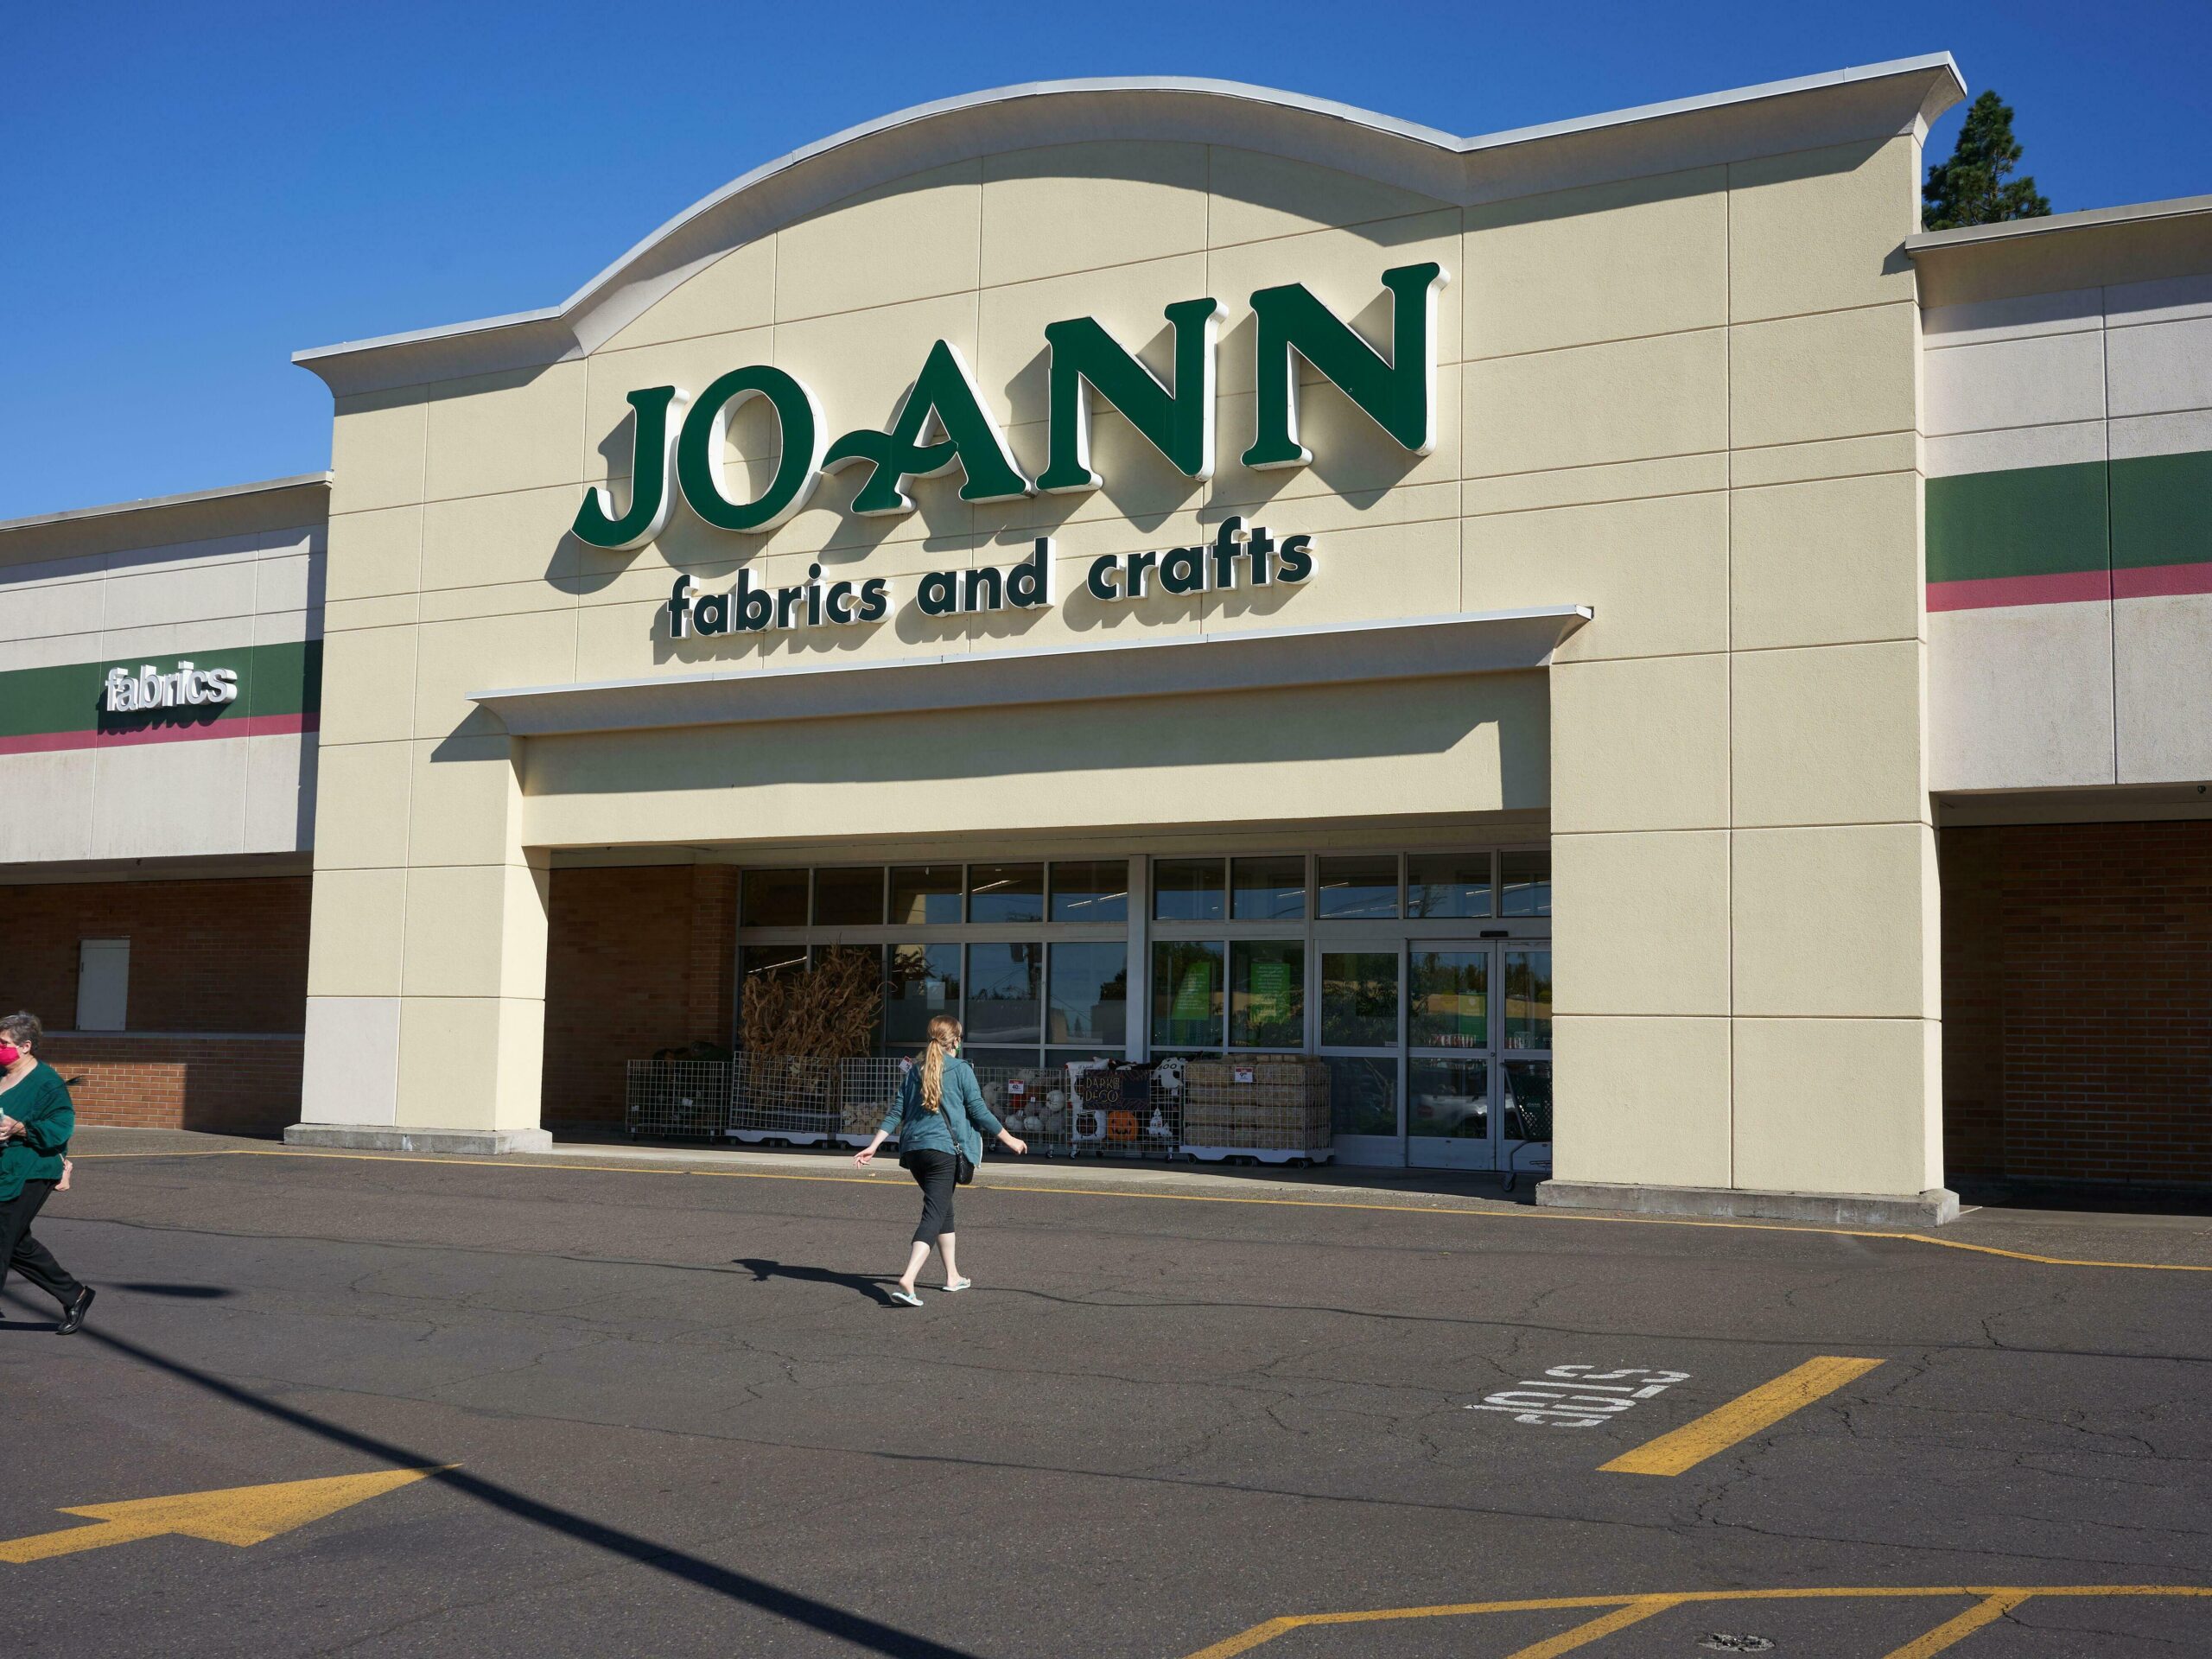 The arts and crafts giant Joann files for bankruptcy, but stores will remain open